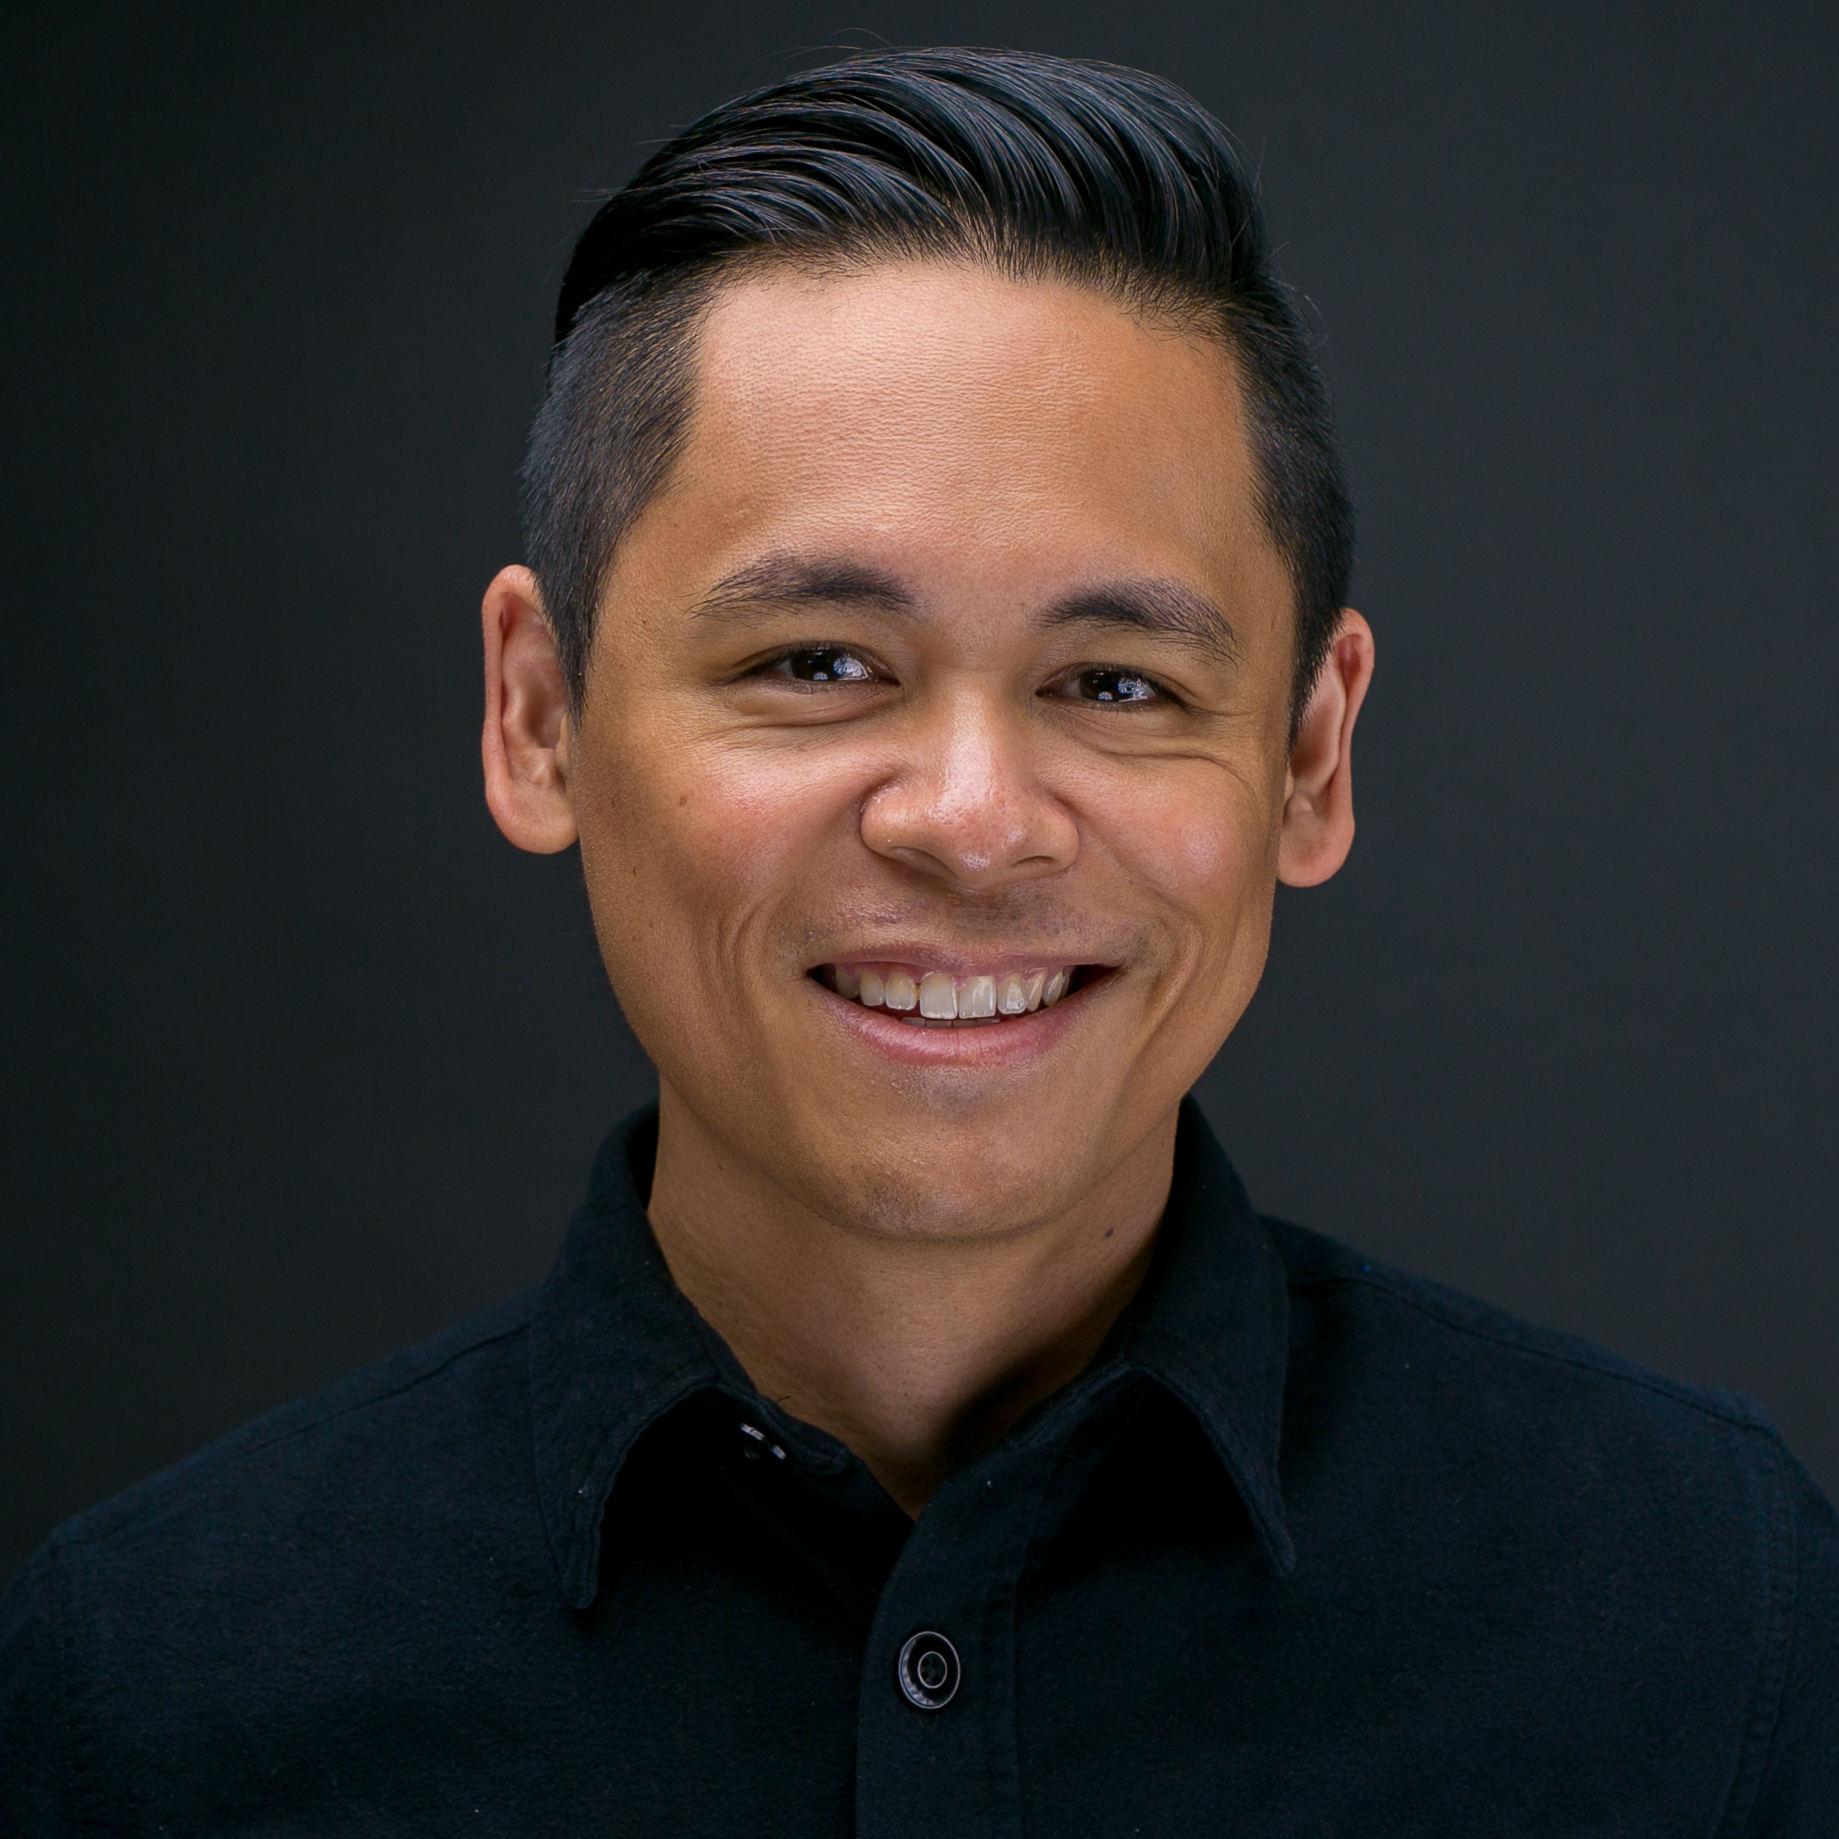 Introducing Vince Cabansag, our new Director of Technology